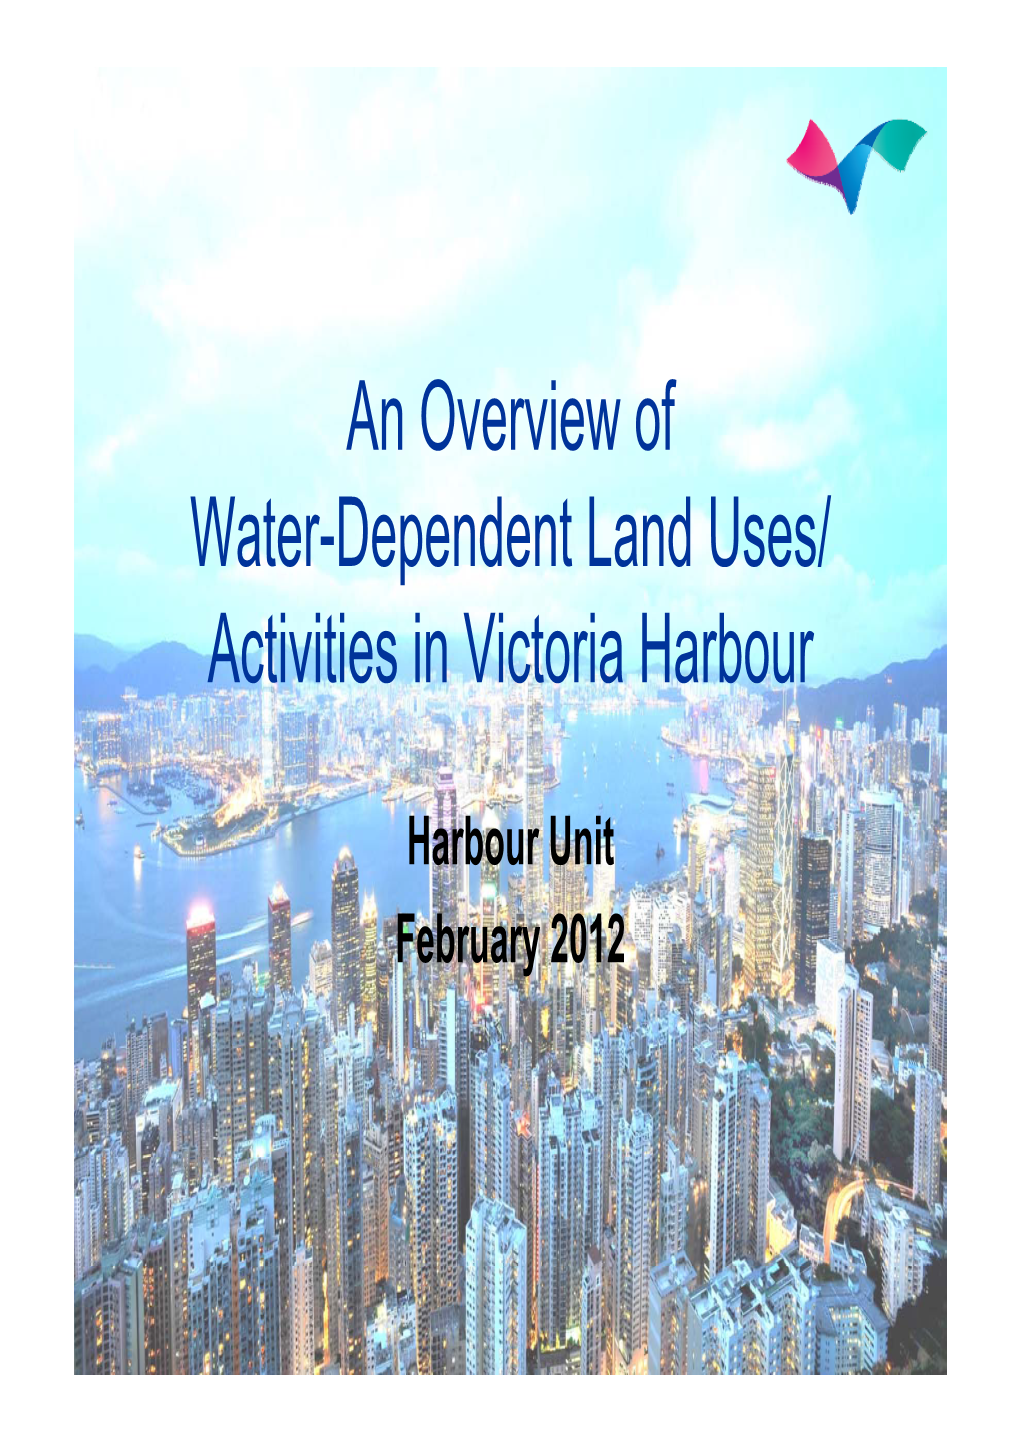 An Overview of Water-Dependent Land Uses/ Activities in Victoria Harbour